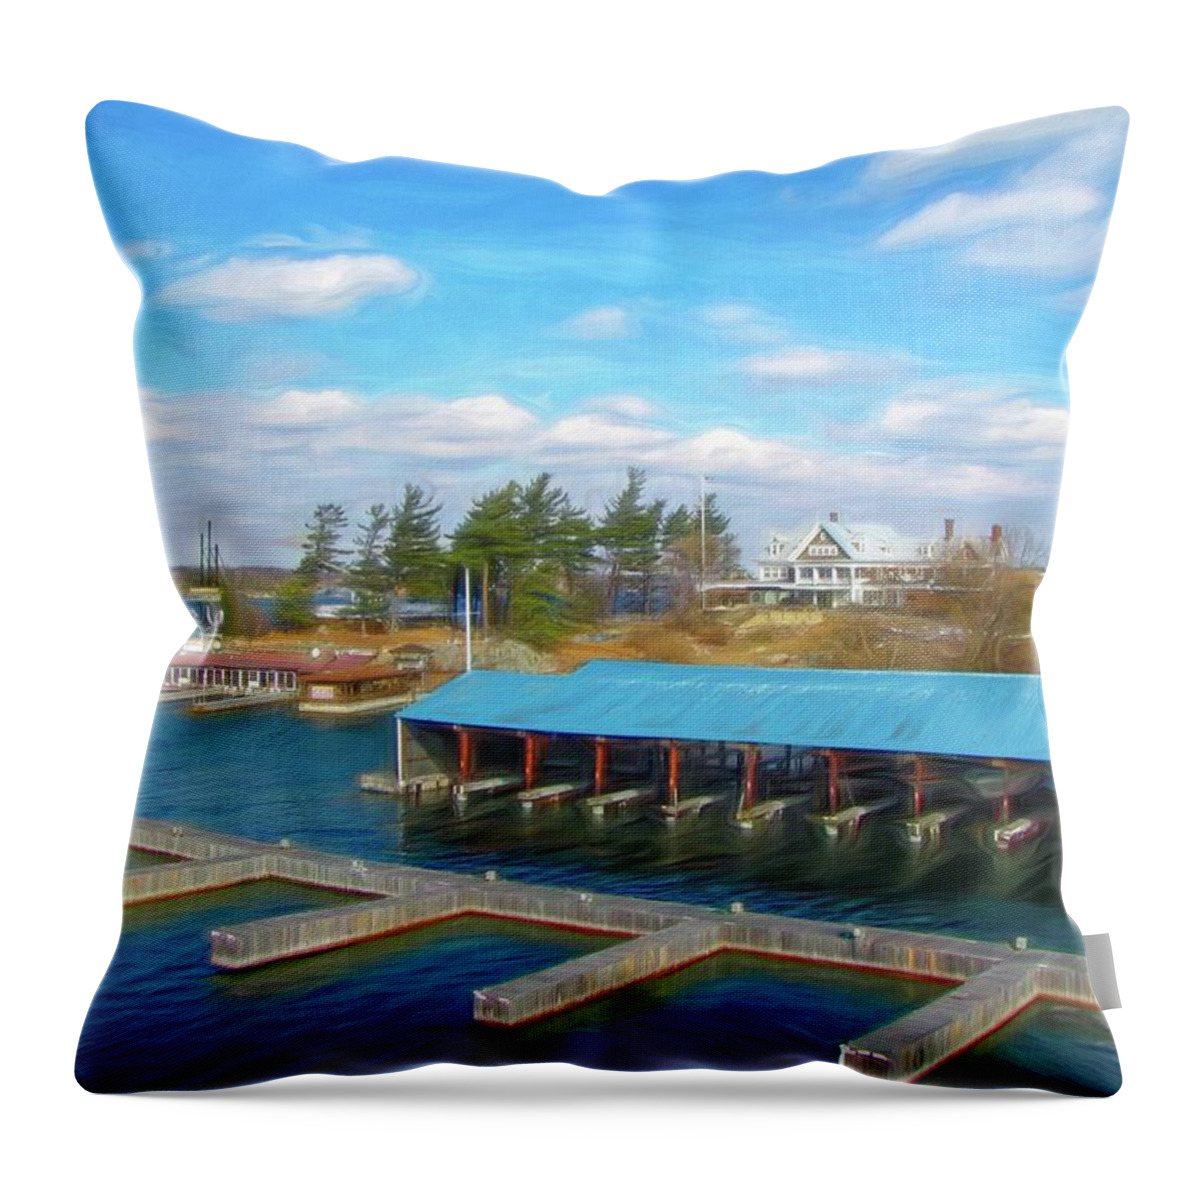 Alexandria Bay Throw Pillow featuring the photograph Bonnie Castle Resort by Susan Hope Finley